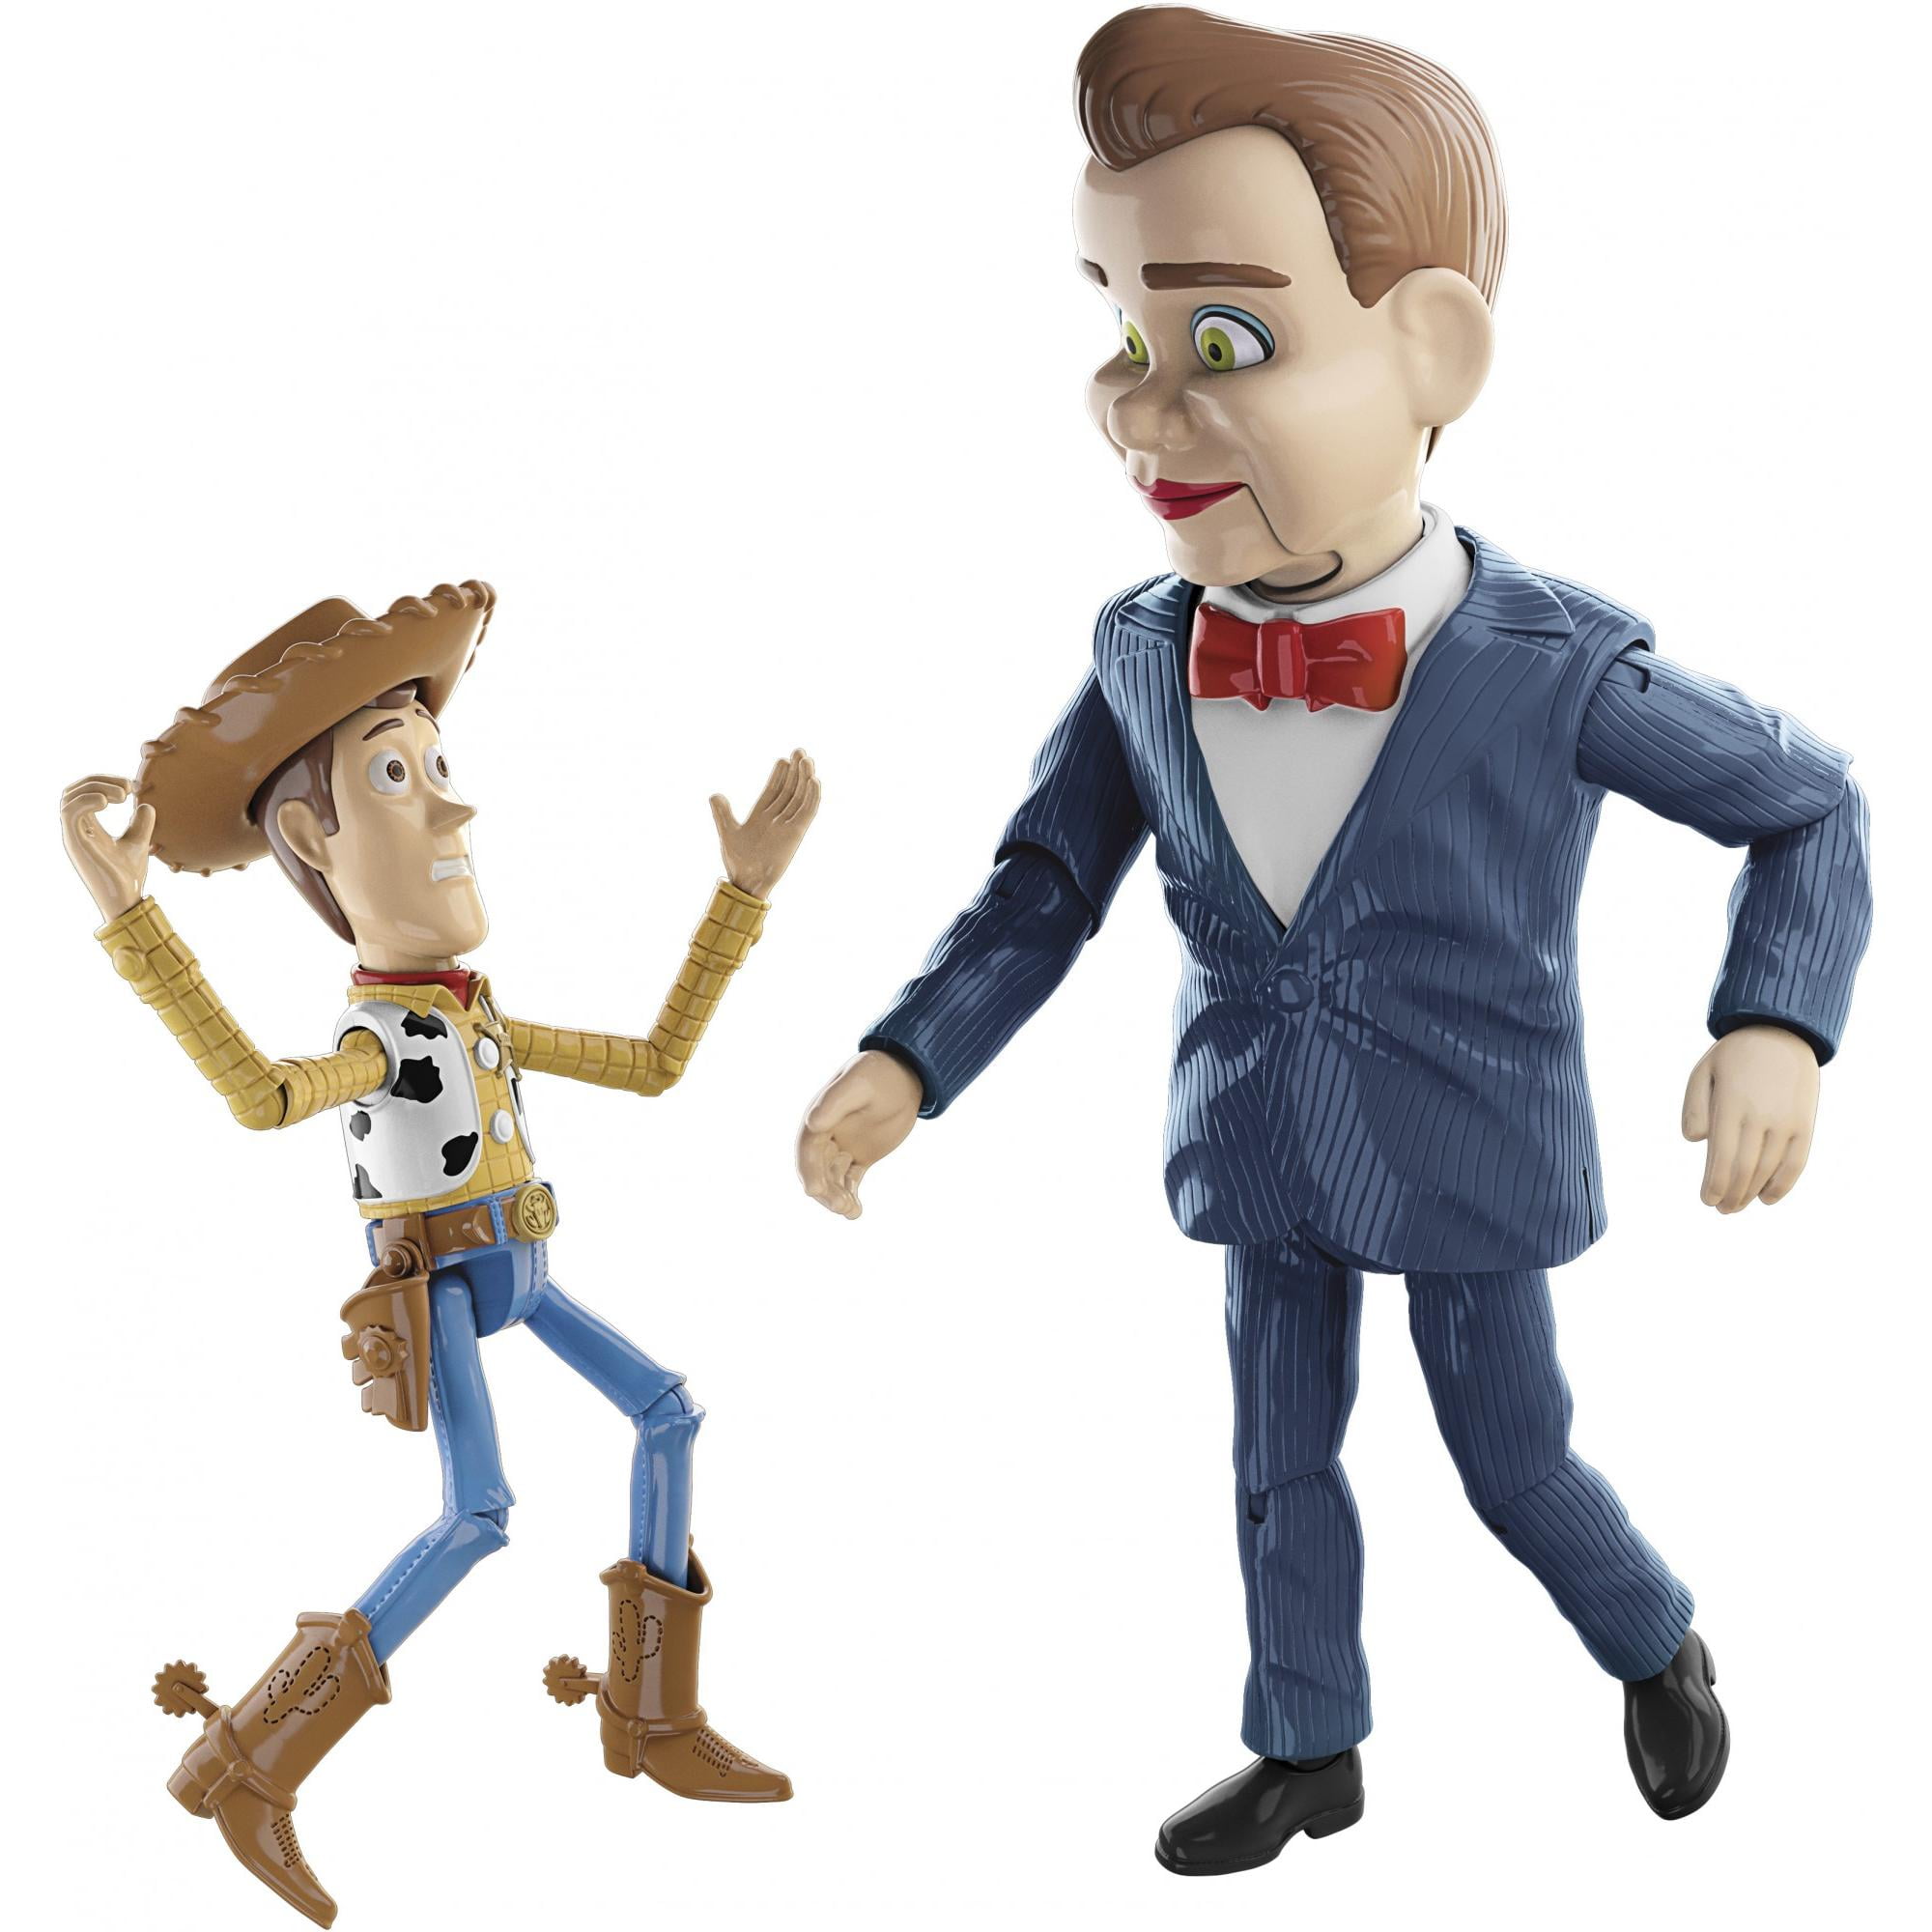 Woody Toy Story 4 Benson And 2 Pack Disney Pixar New Movie Figures Exclusive 